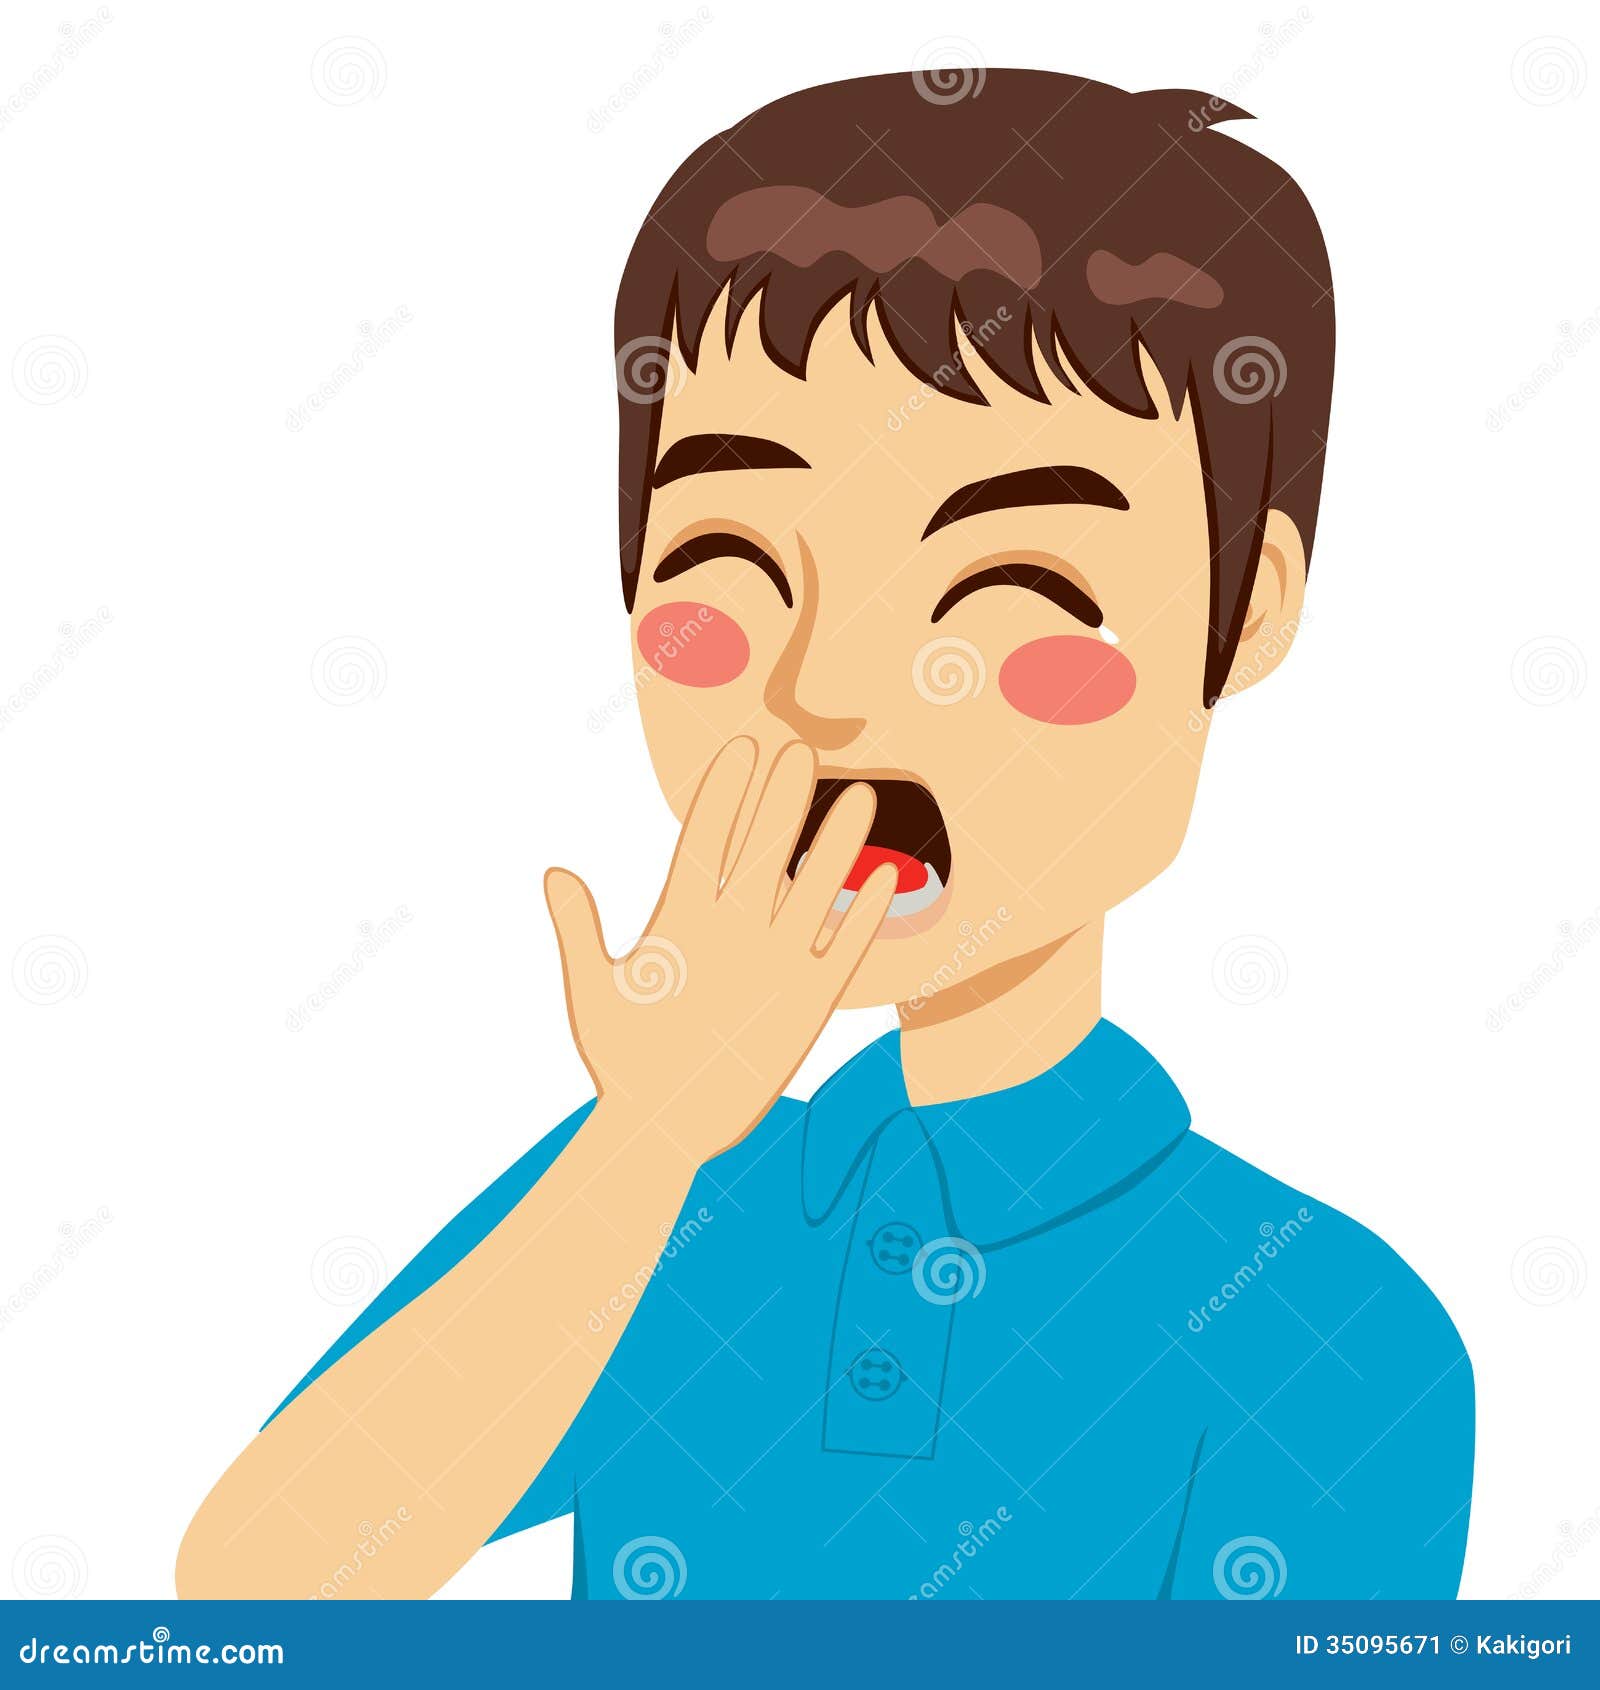 clipart person yawning - photo #5